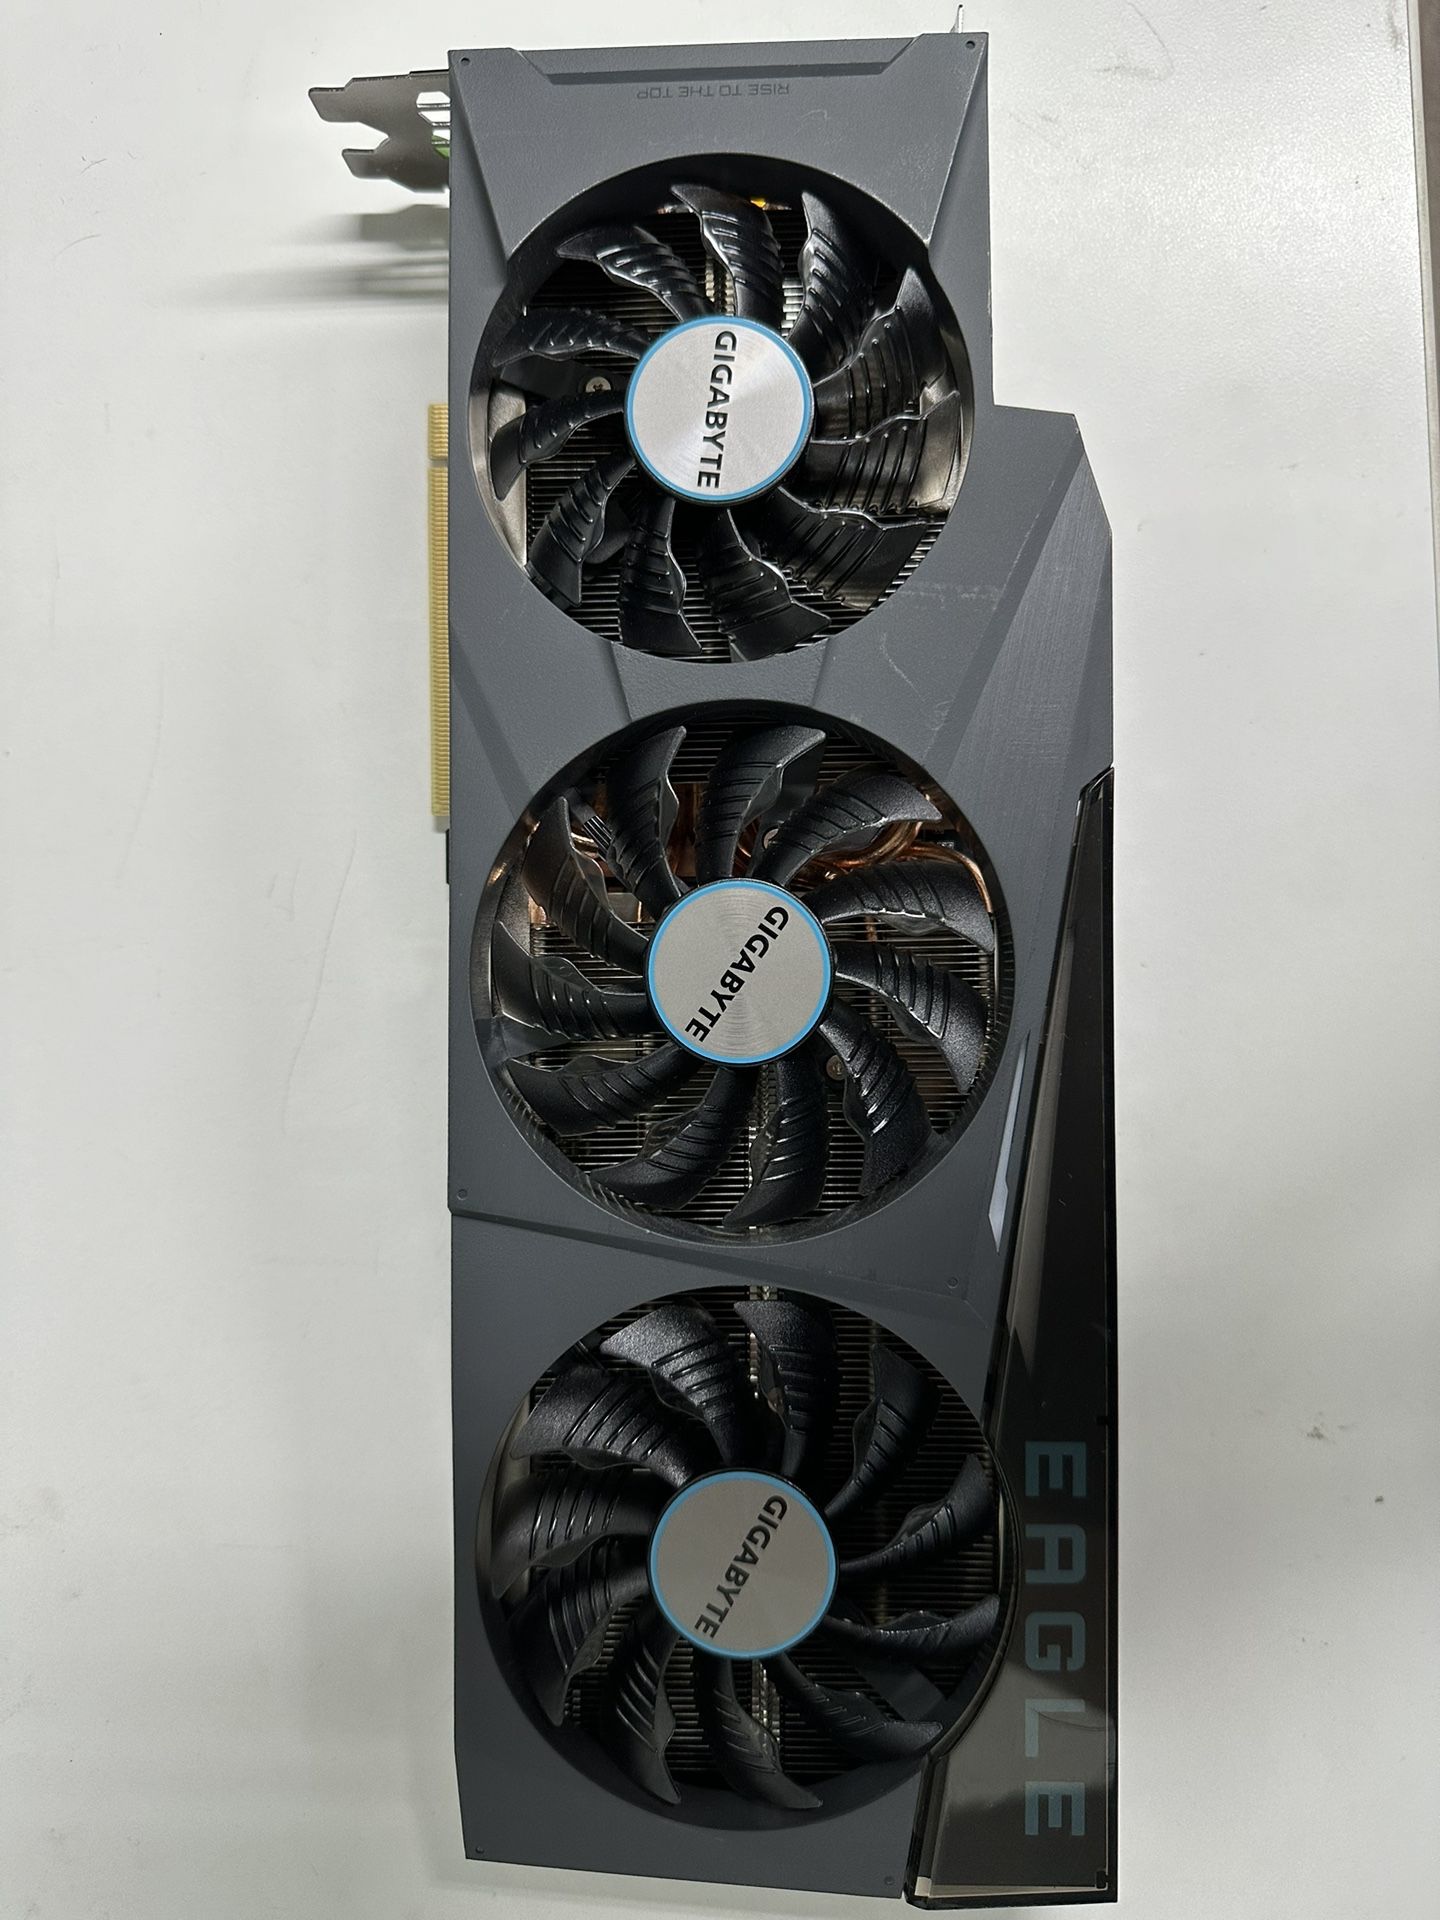 Gigabyte Eagle 3080 gpu in like new condition with warranty